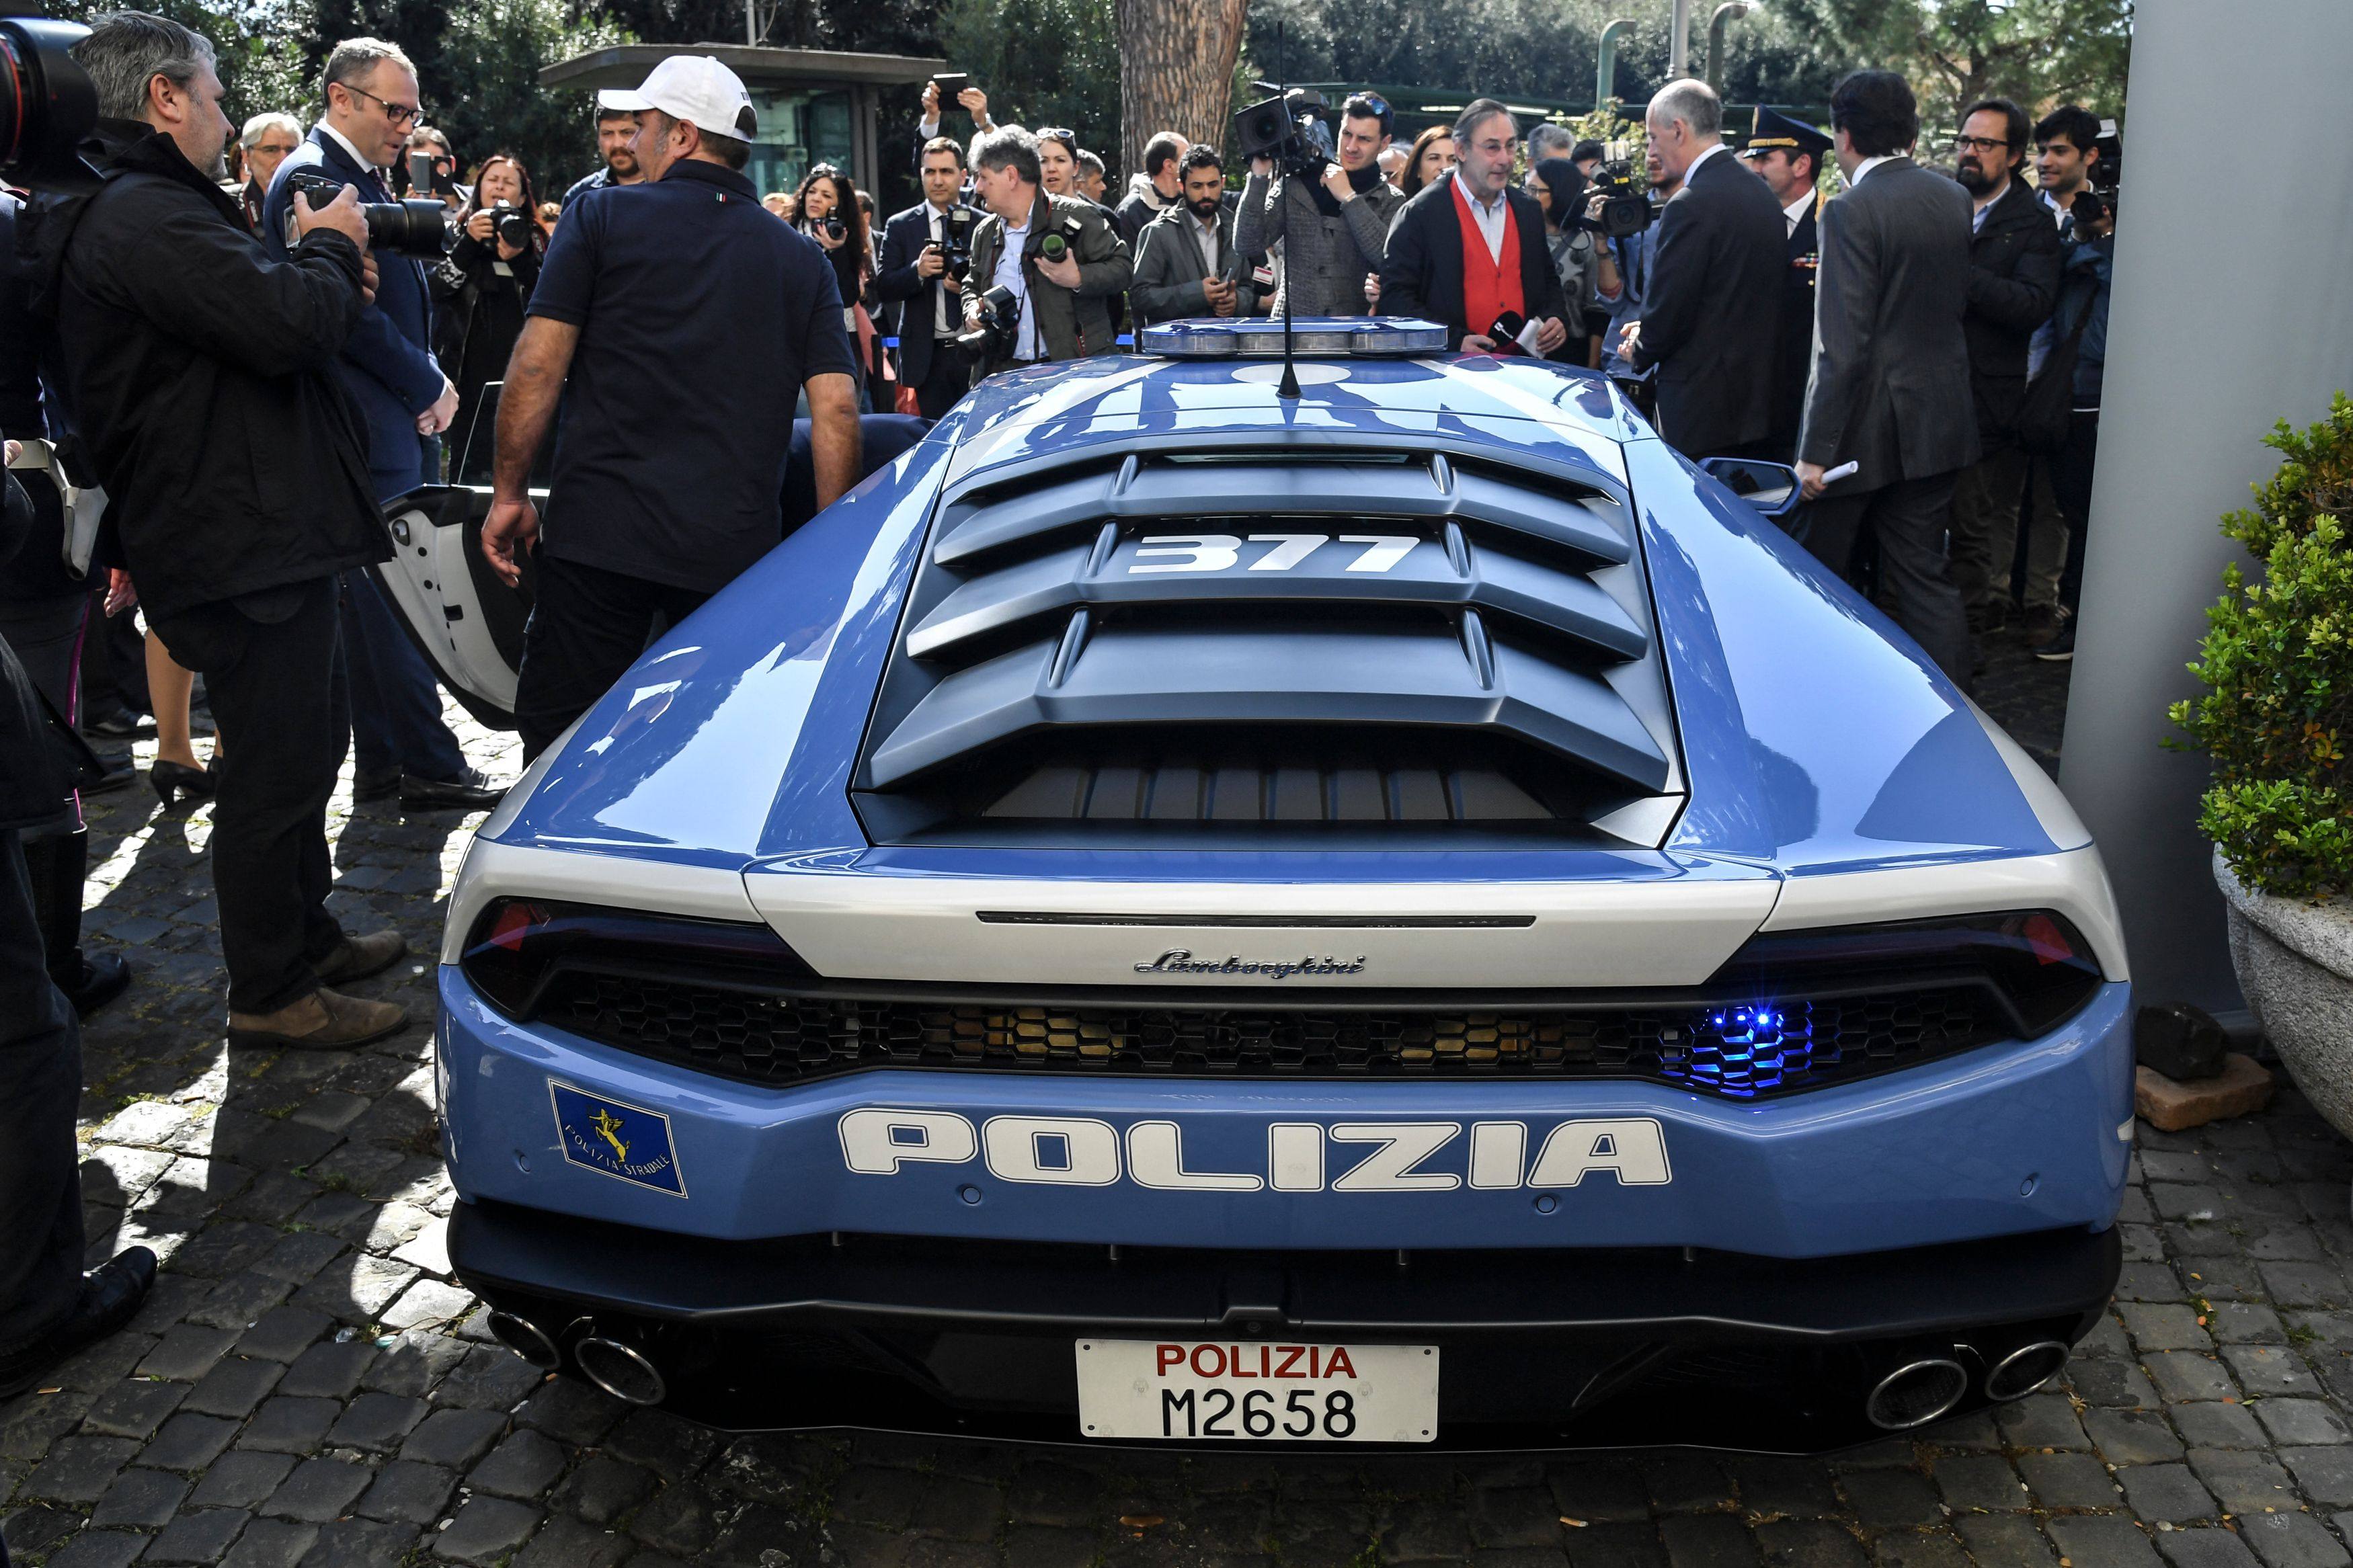 A Lamborghini police car used to deliver two kidneys to patients awaiting transplants. File photo: AFP